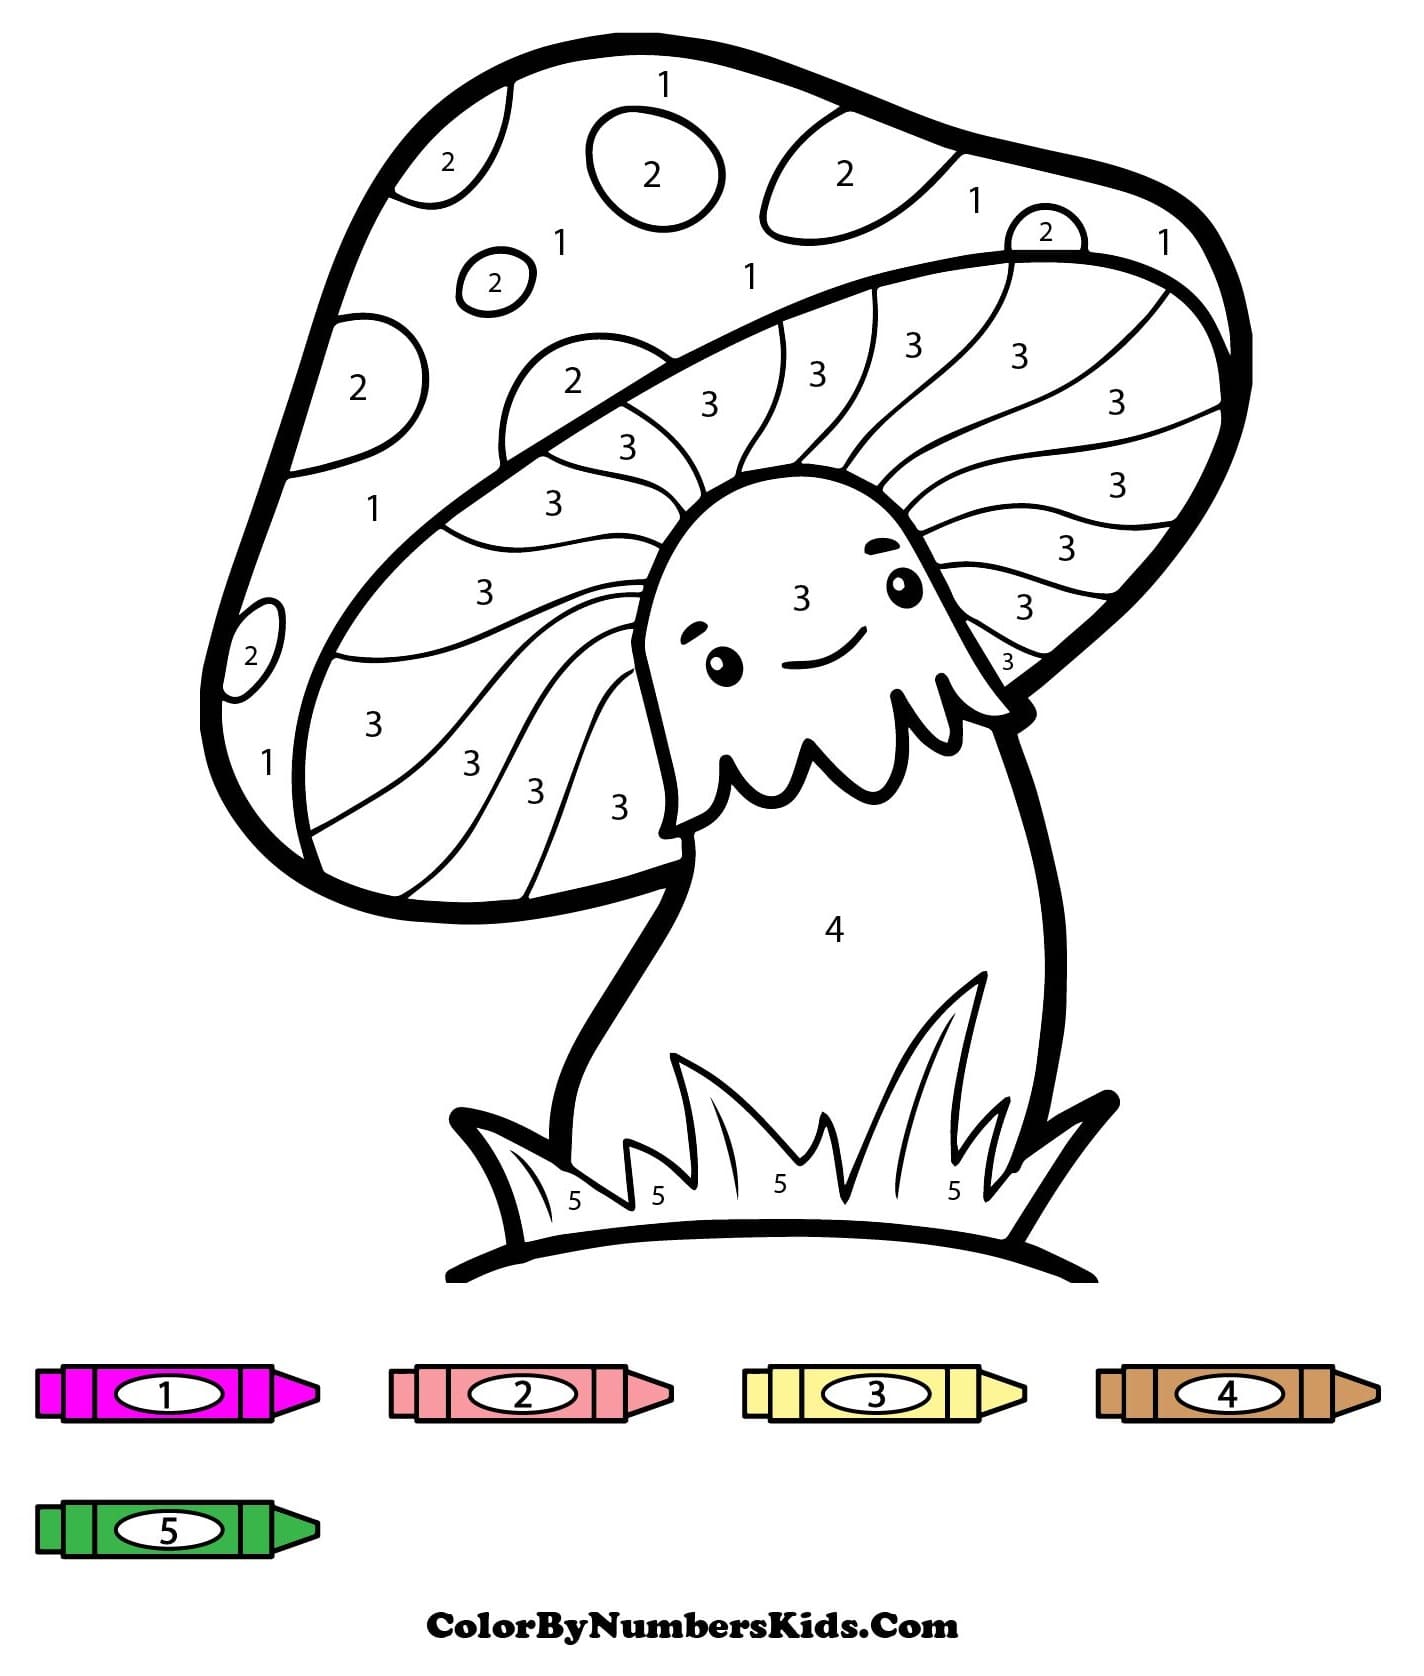 Adorable Mushroom Color By Number